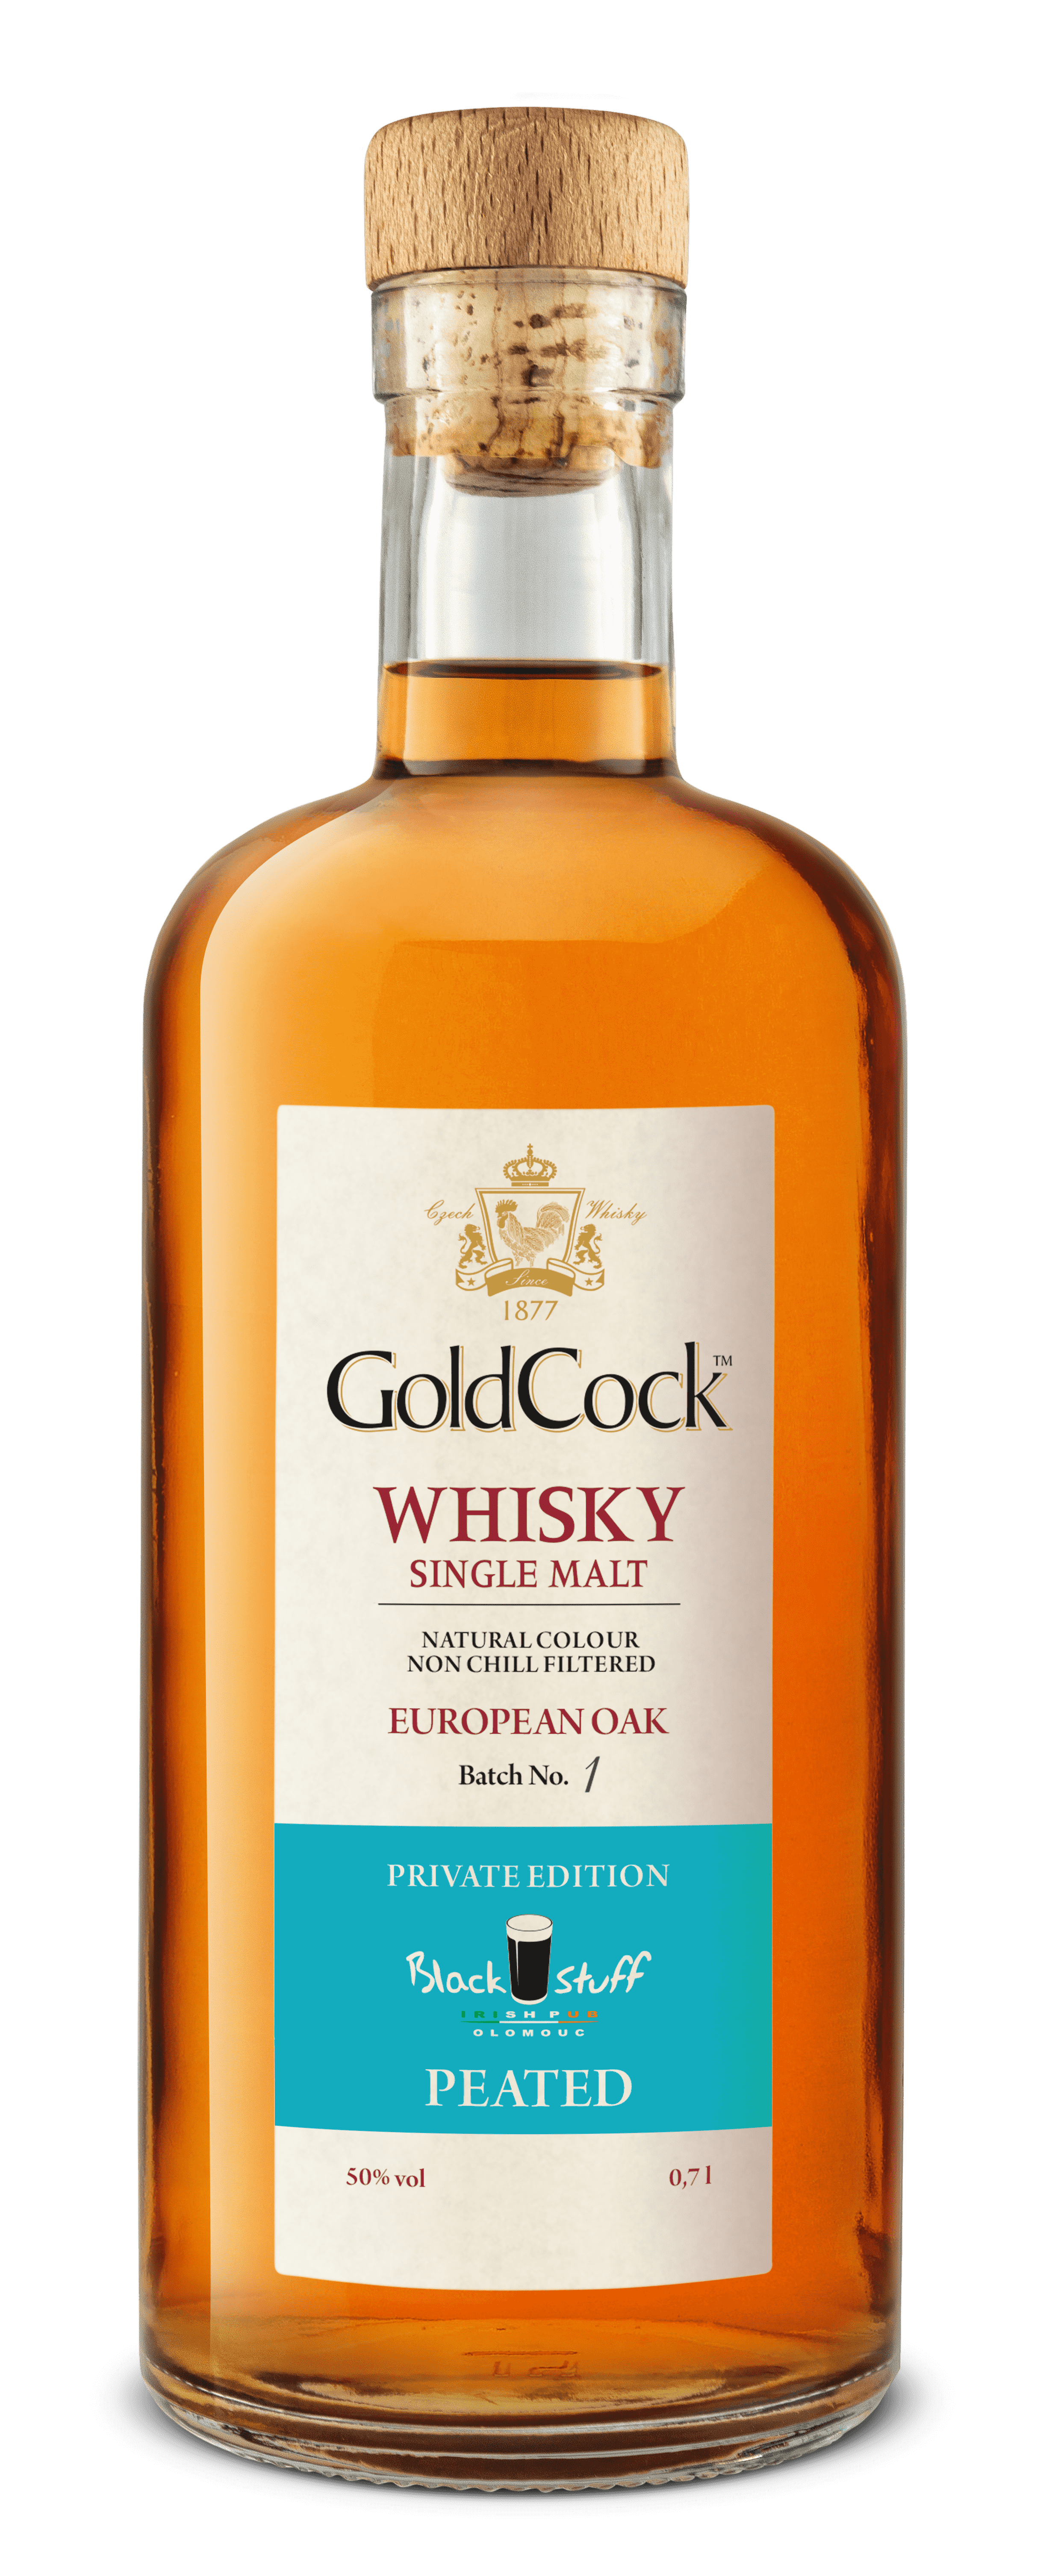 GOLDCOCK 2016 PEATED FOR BLACK STUFF 50% 0,7L